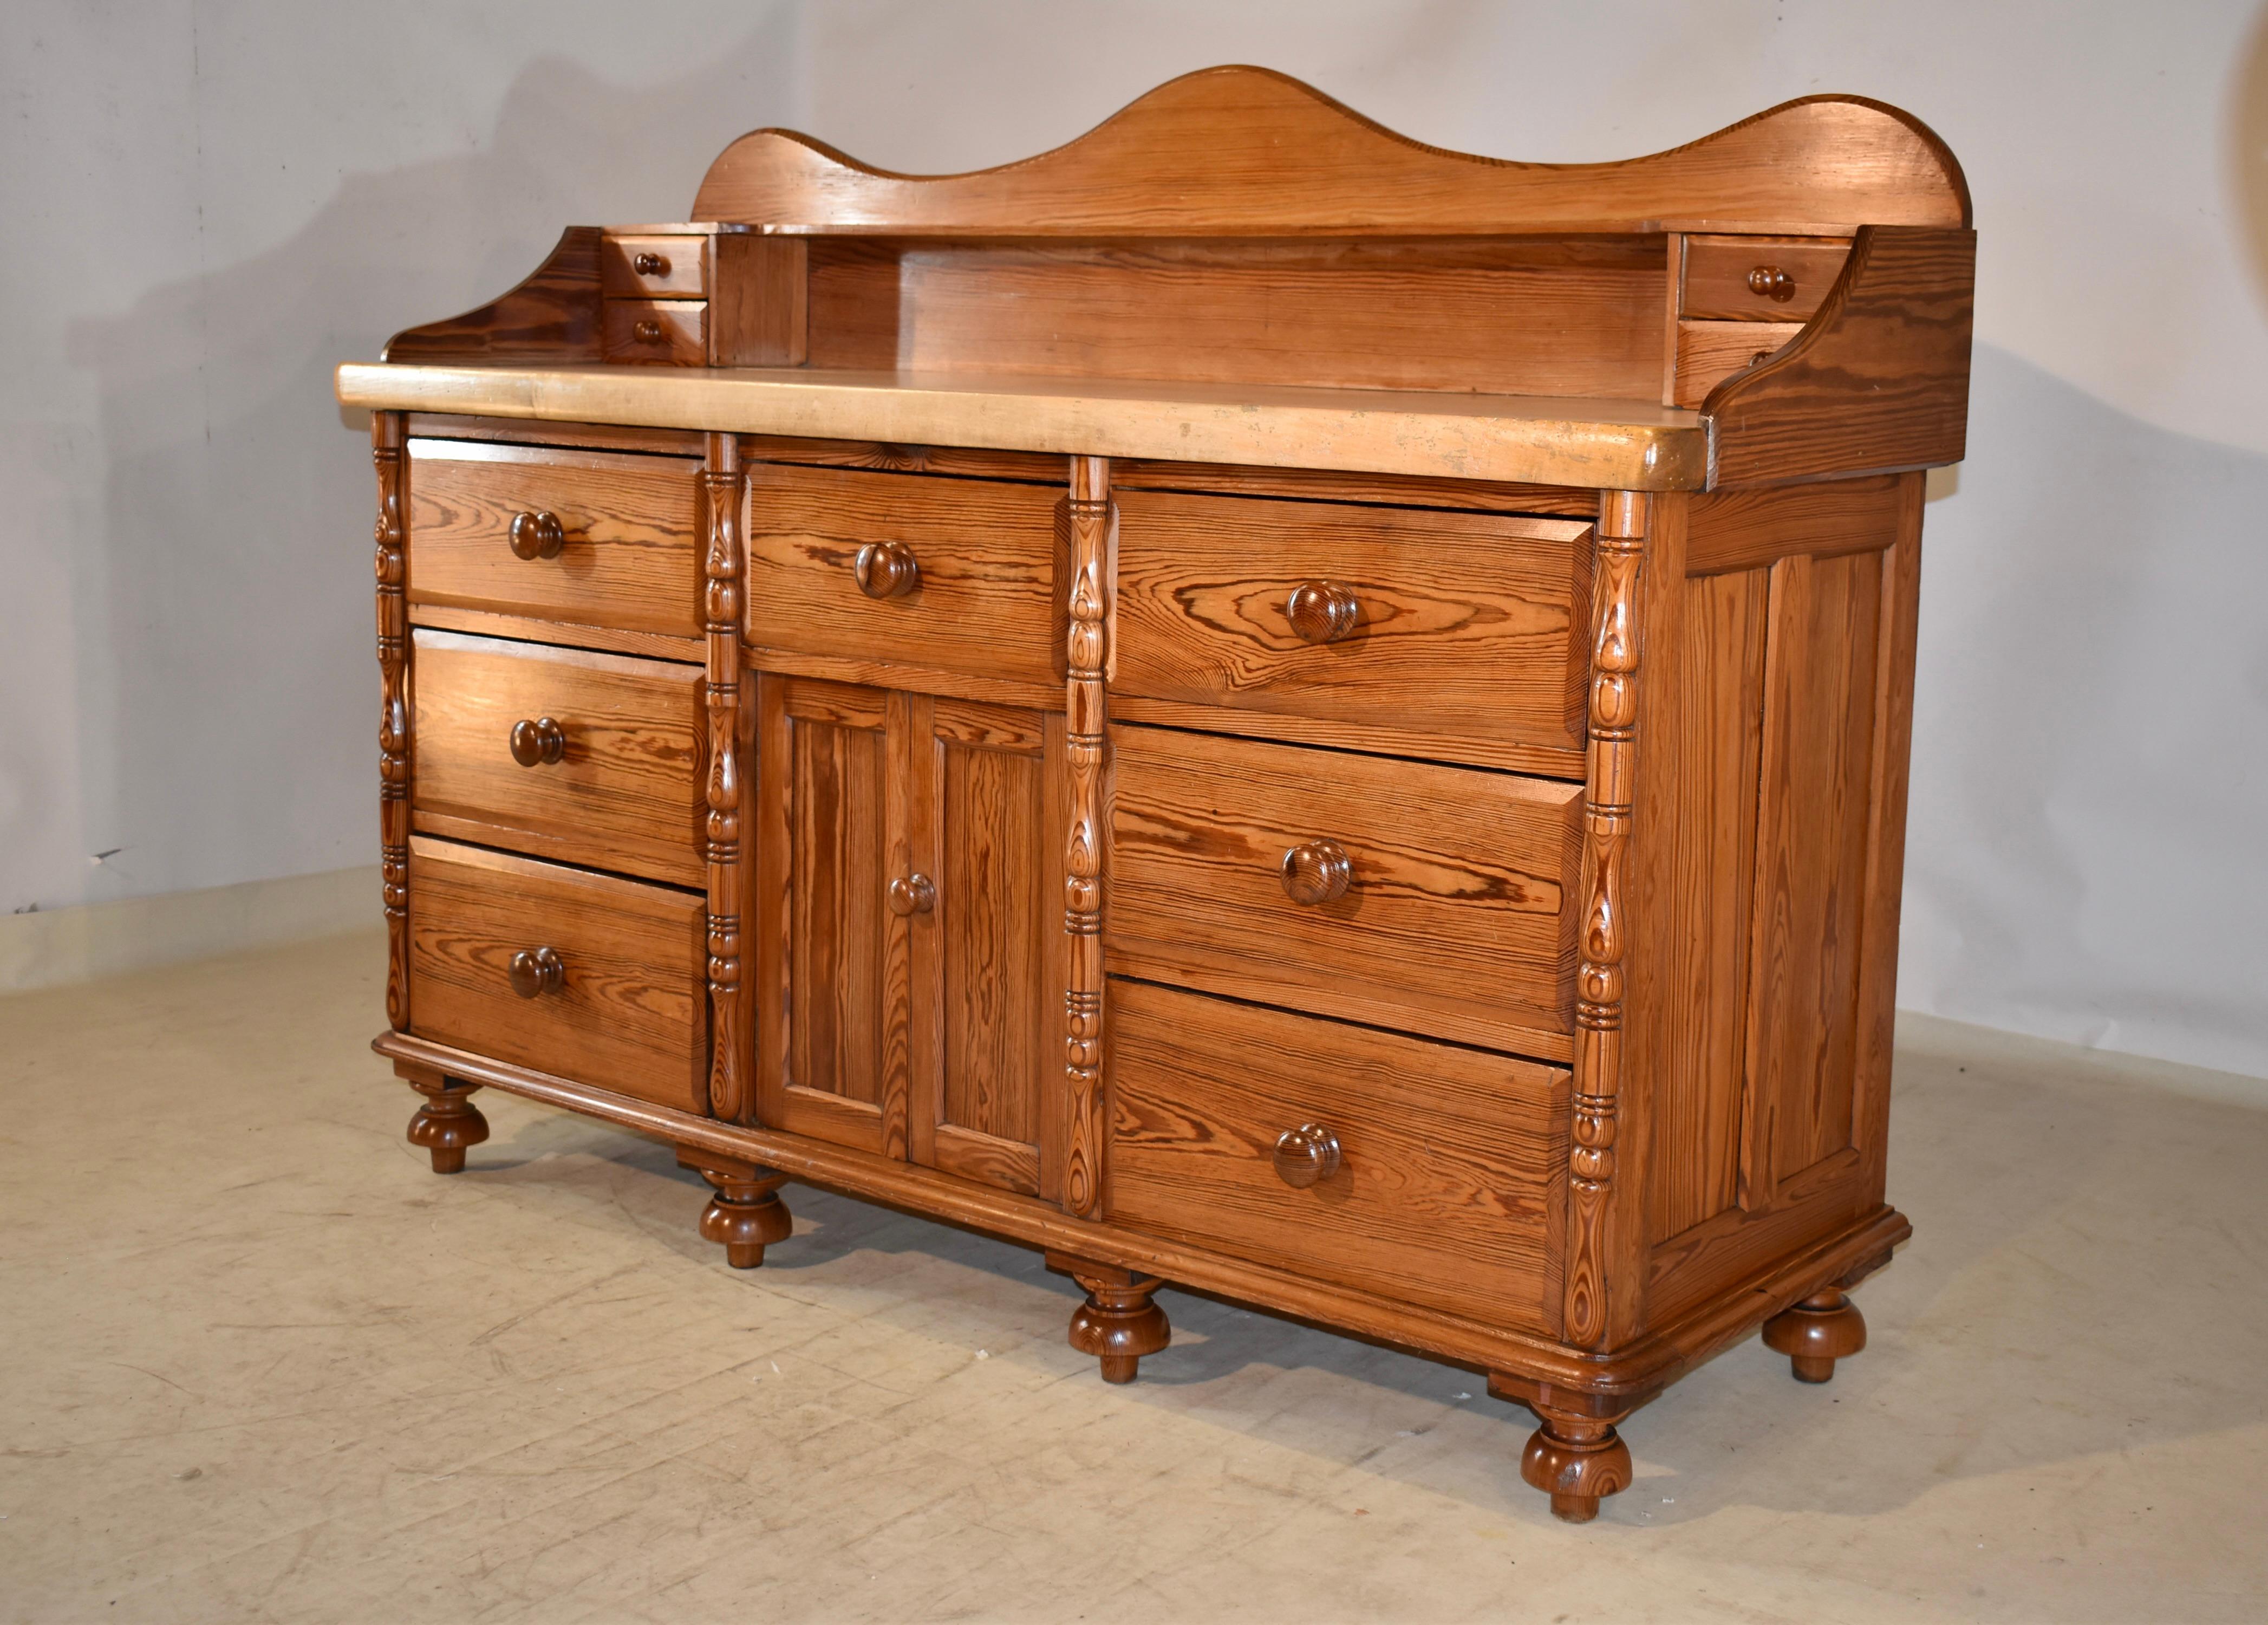 19th Century Pitch Pine Sideboard with Sycamore Top In Good Condition For Sale In High Point, NC